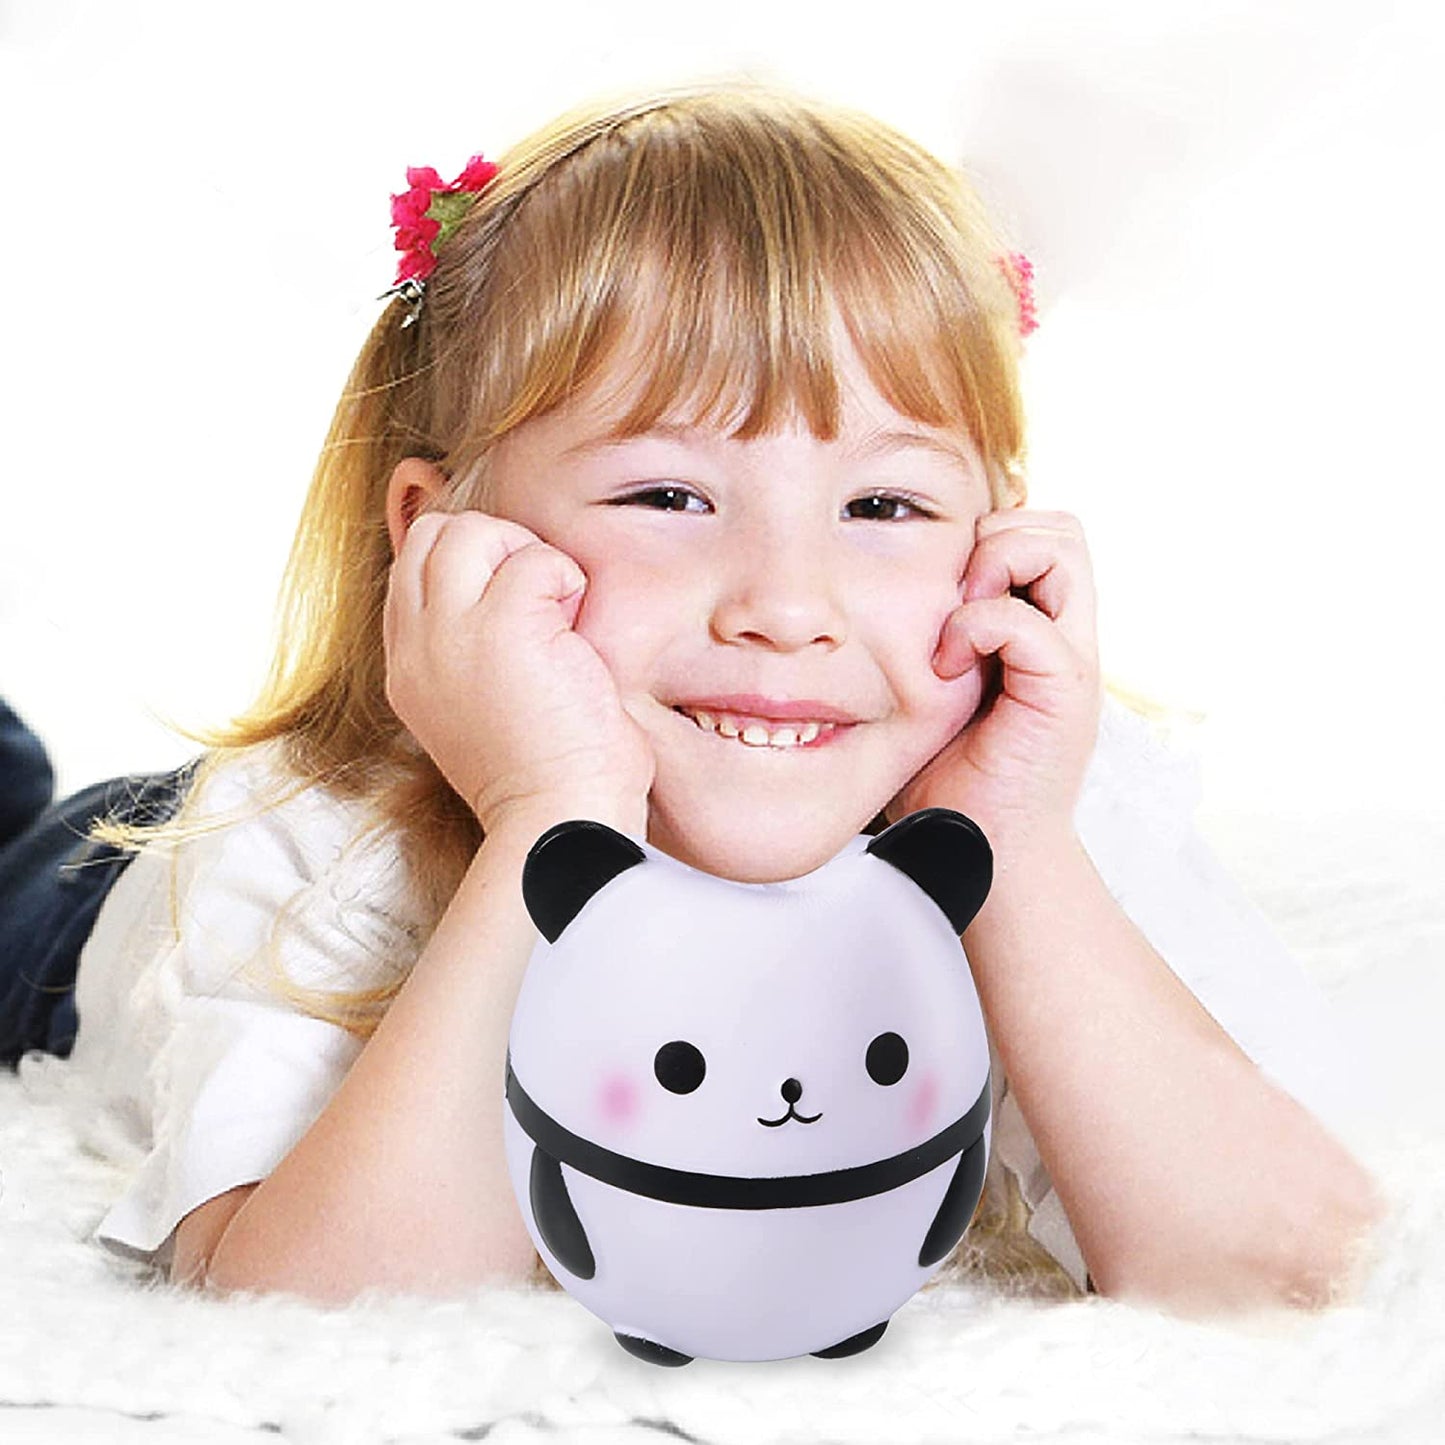 Squishy Panda Squishies Jumbo Slow Rising Squishies Lovely Stress Relief Squishies Toys for Kids and Adults 6.7'' Big Size .